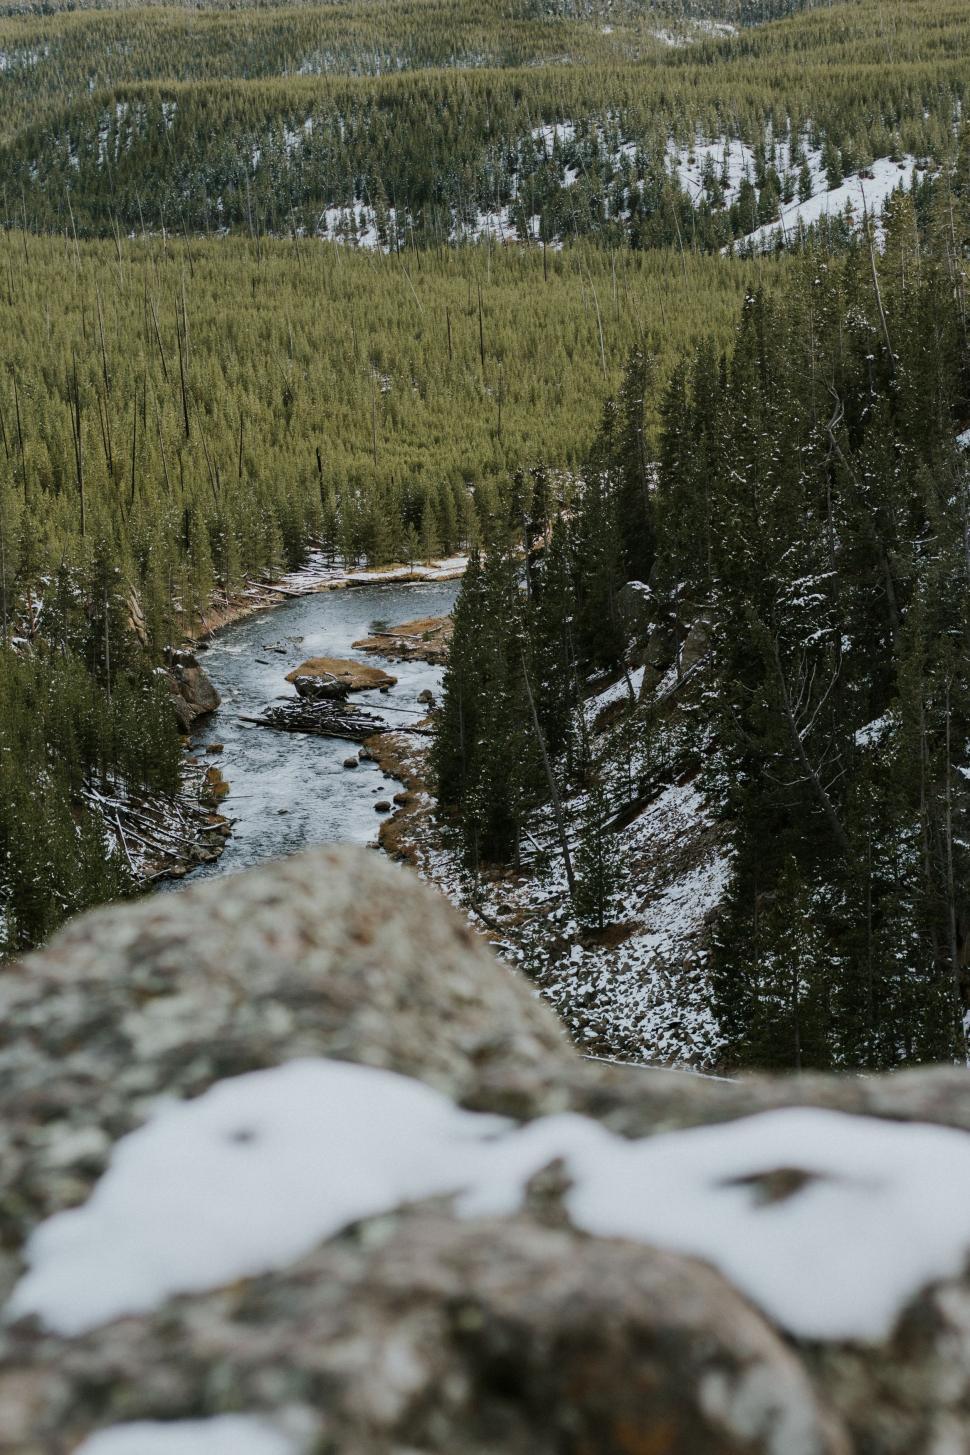 Free Image of Snow-Covered Forest With River Flowing Through 